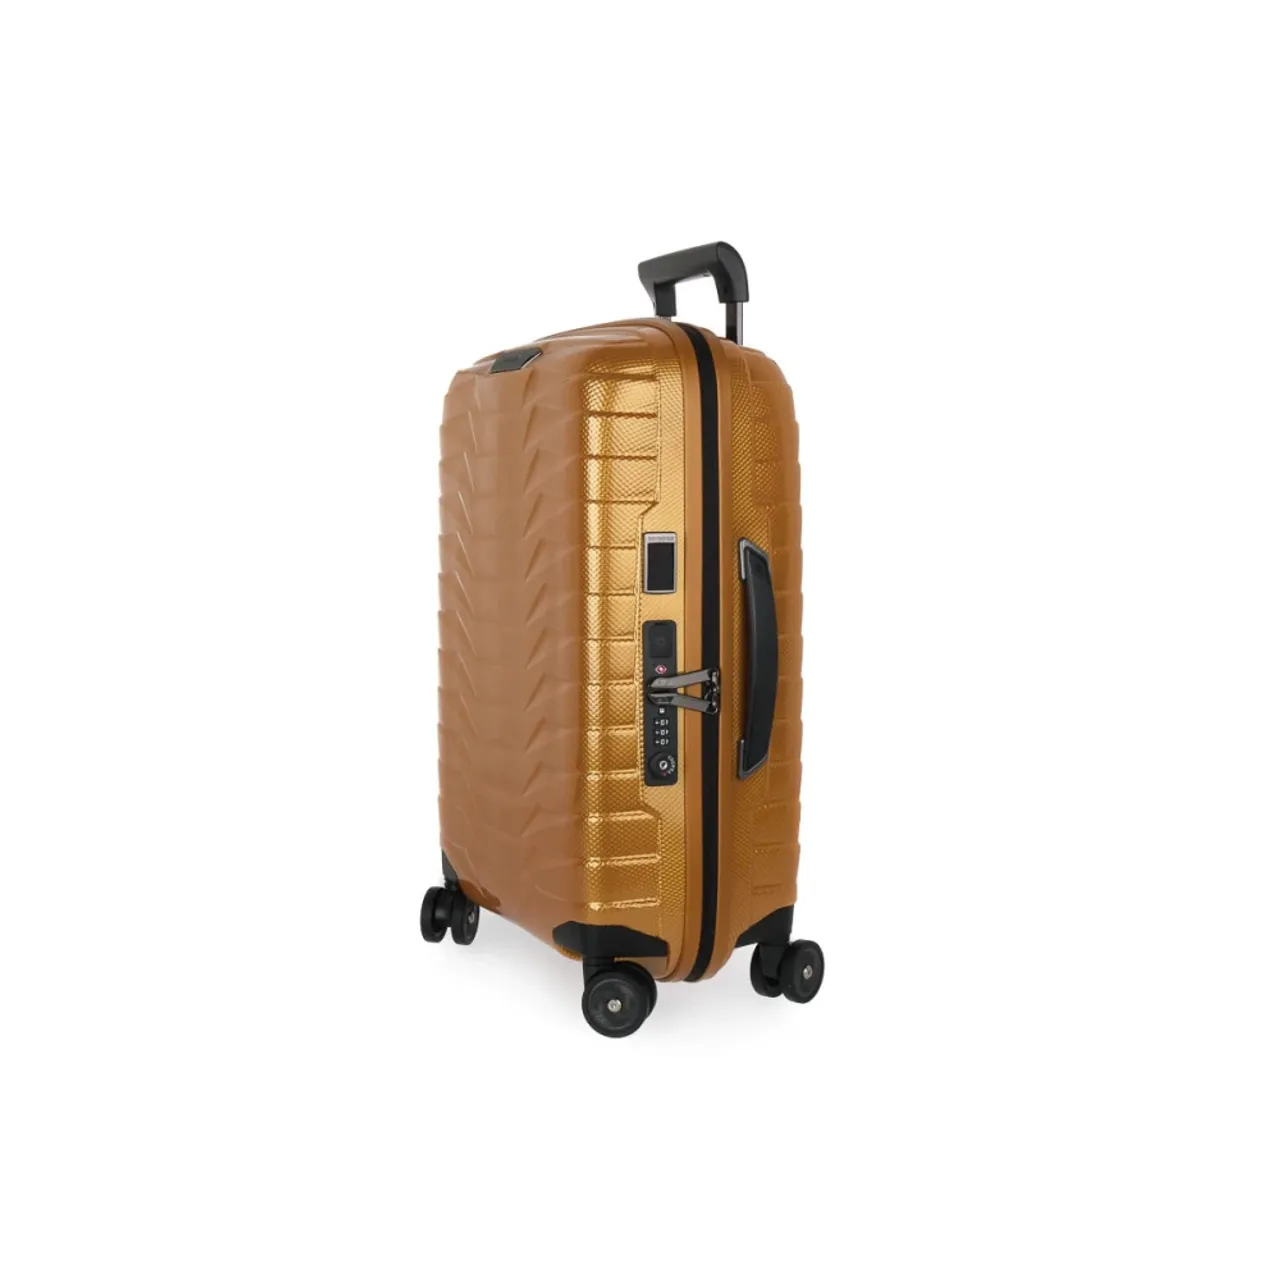 Proxis Spinner 5520 Expandable Samsonite